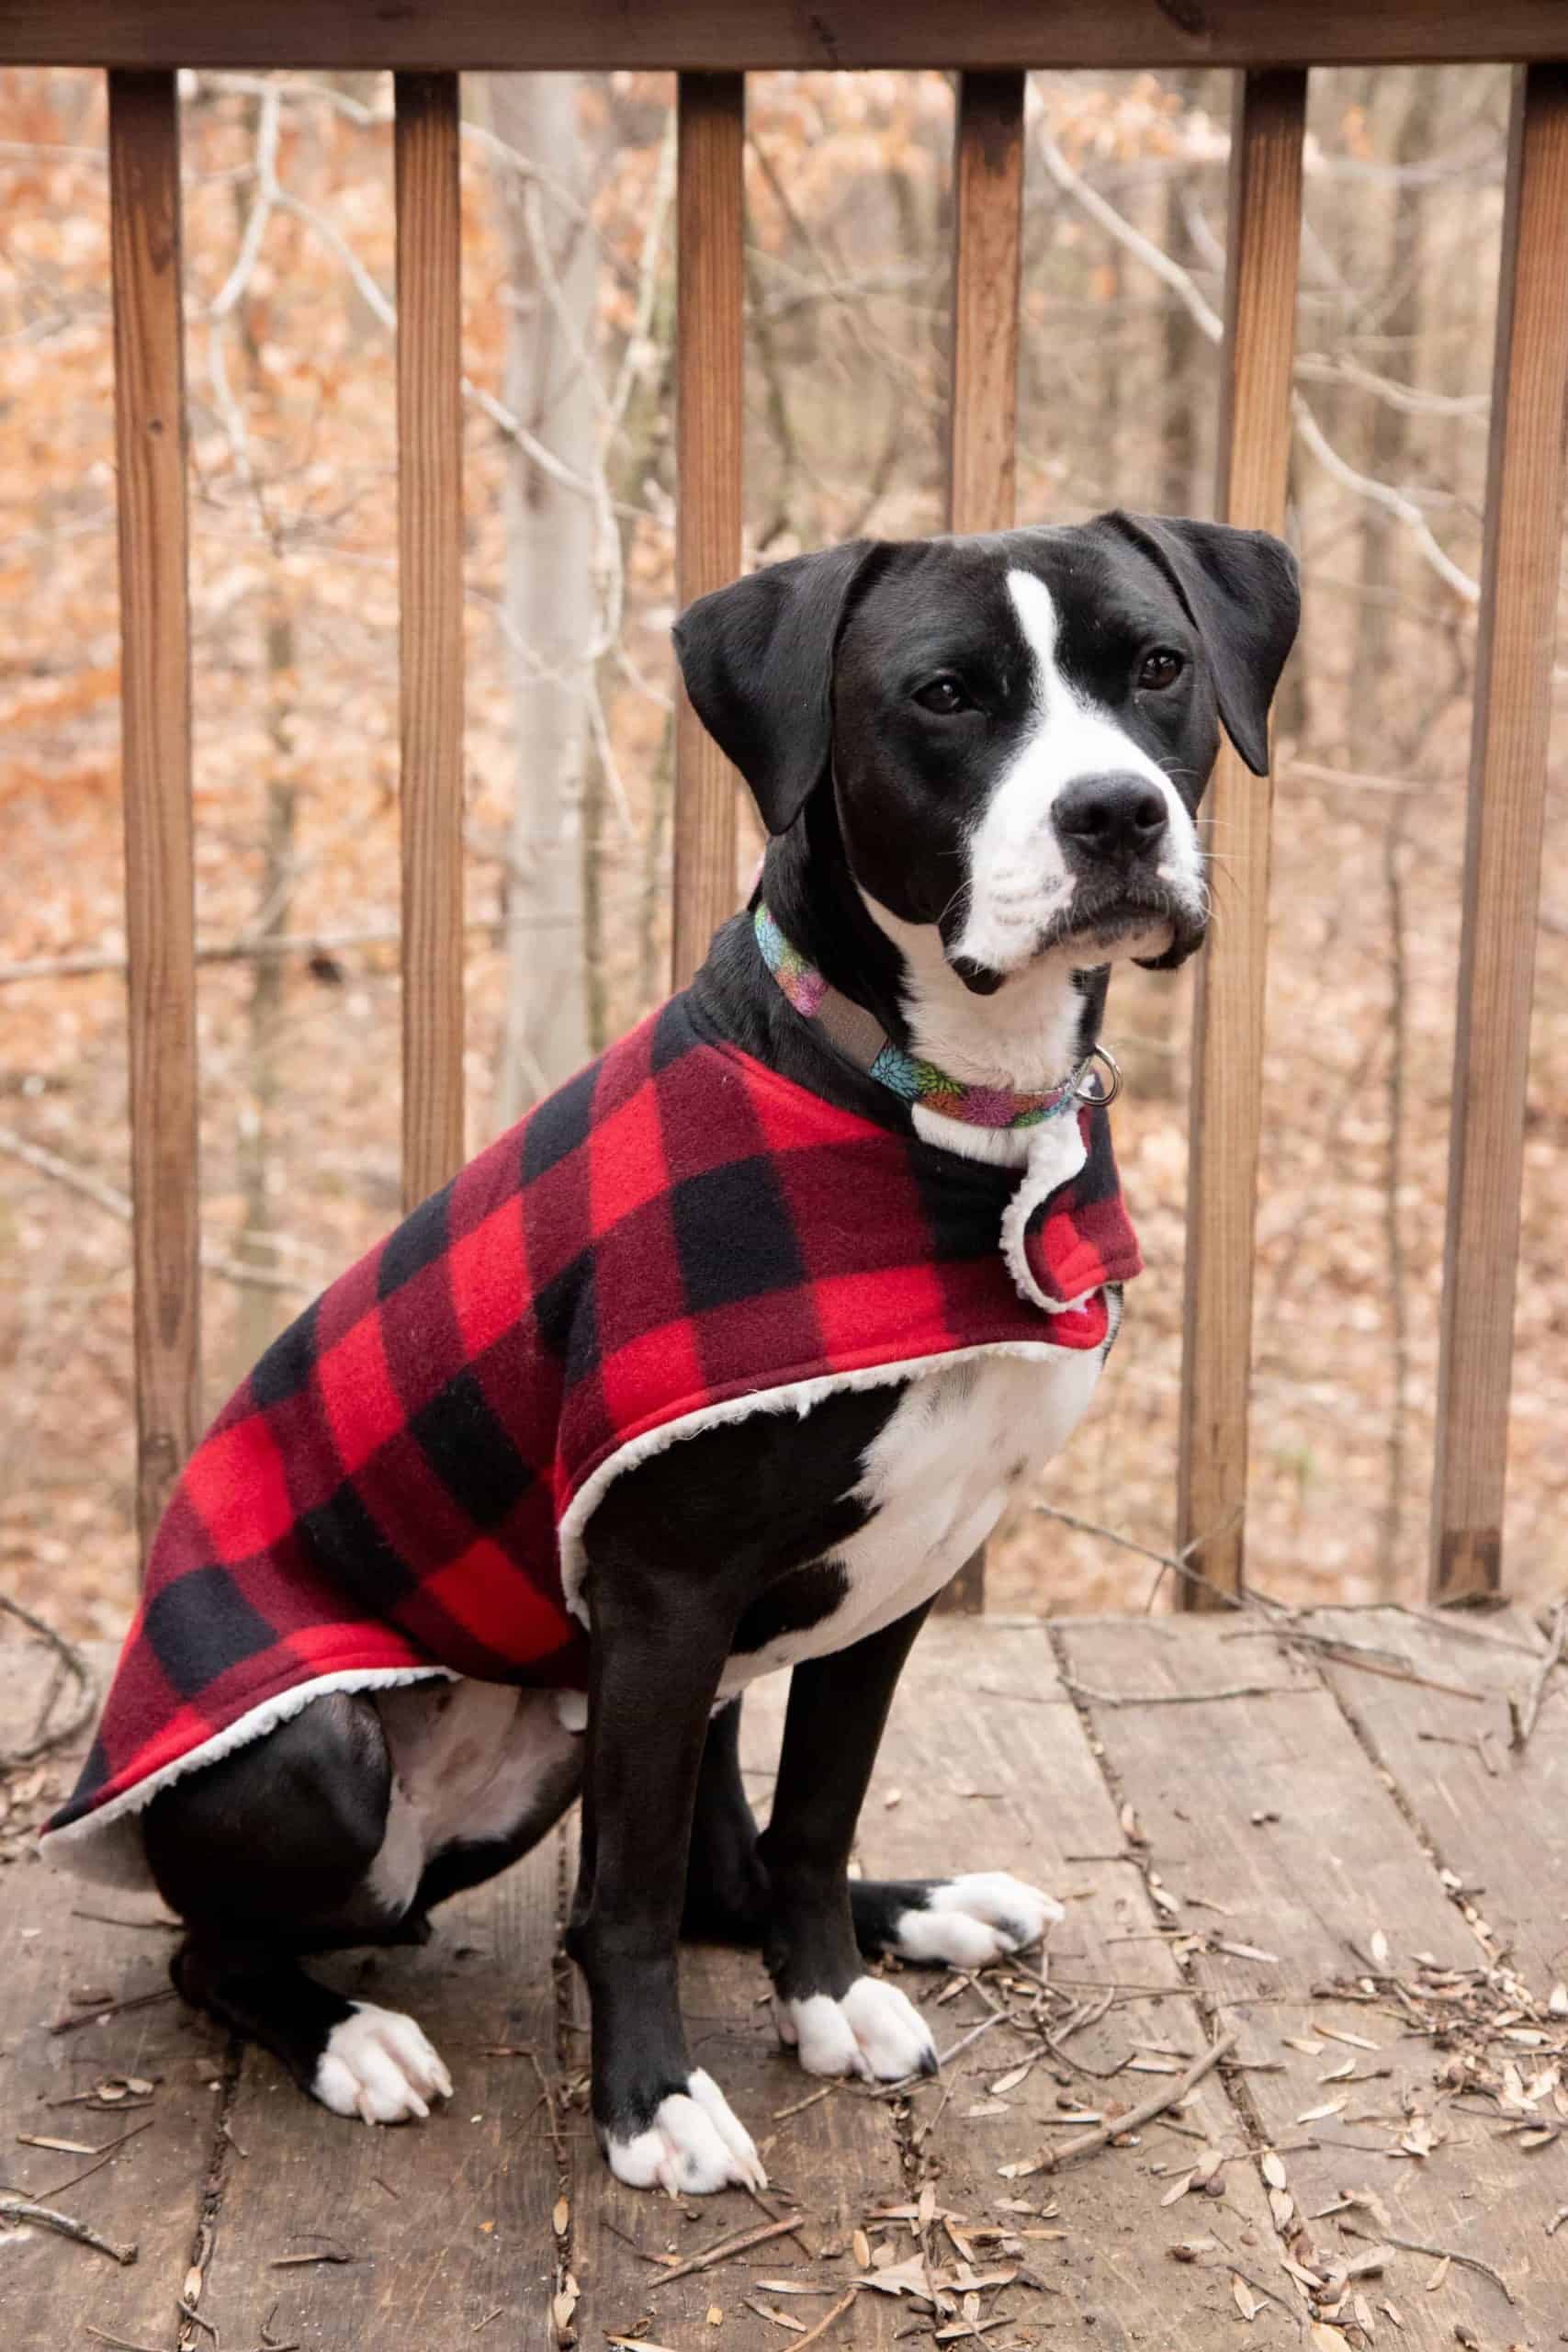 Fuzzy lined home sewn pup coat